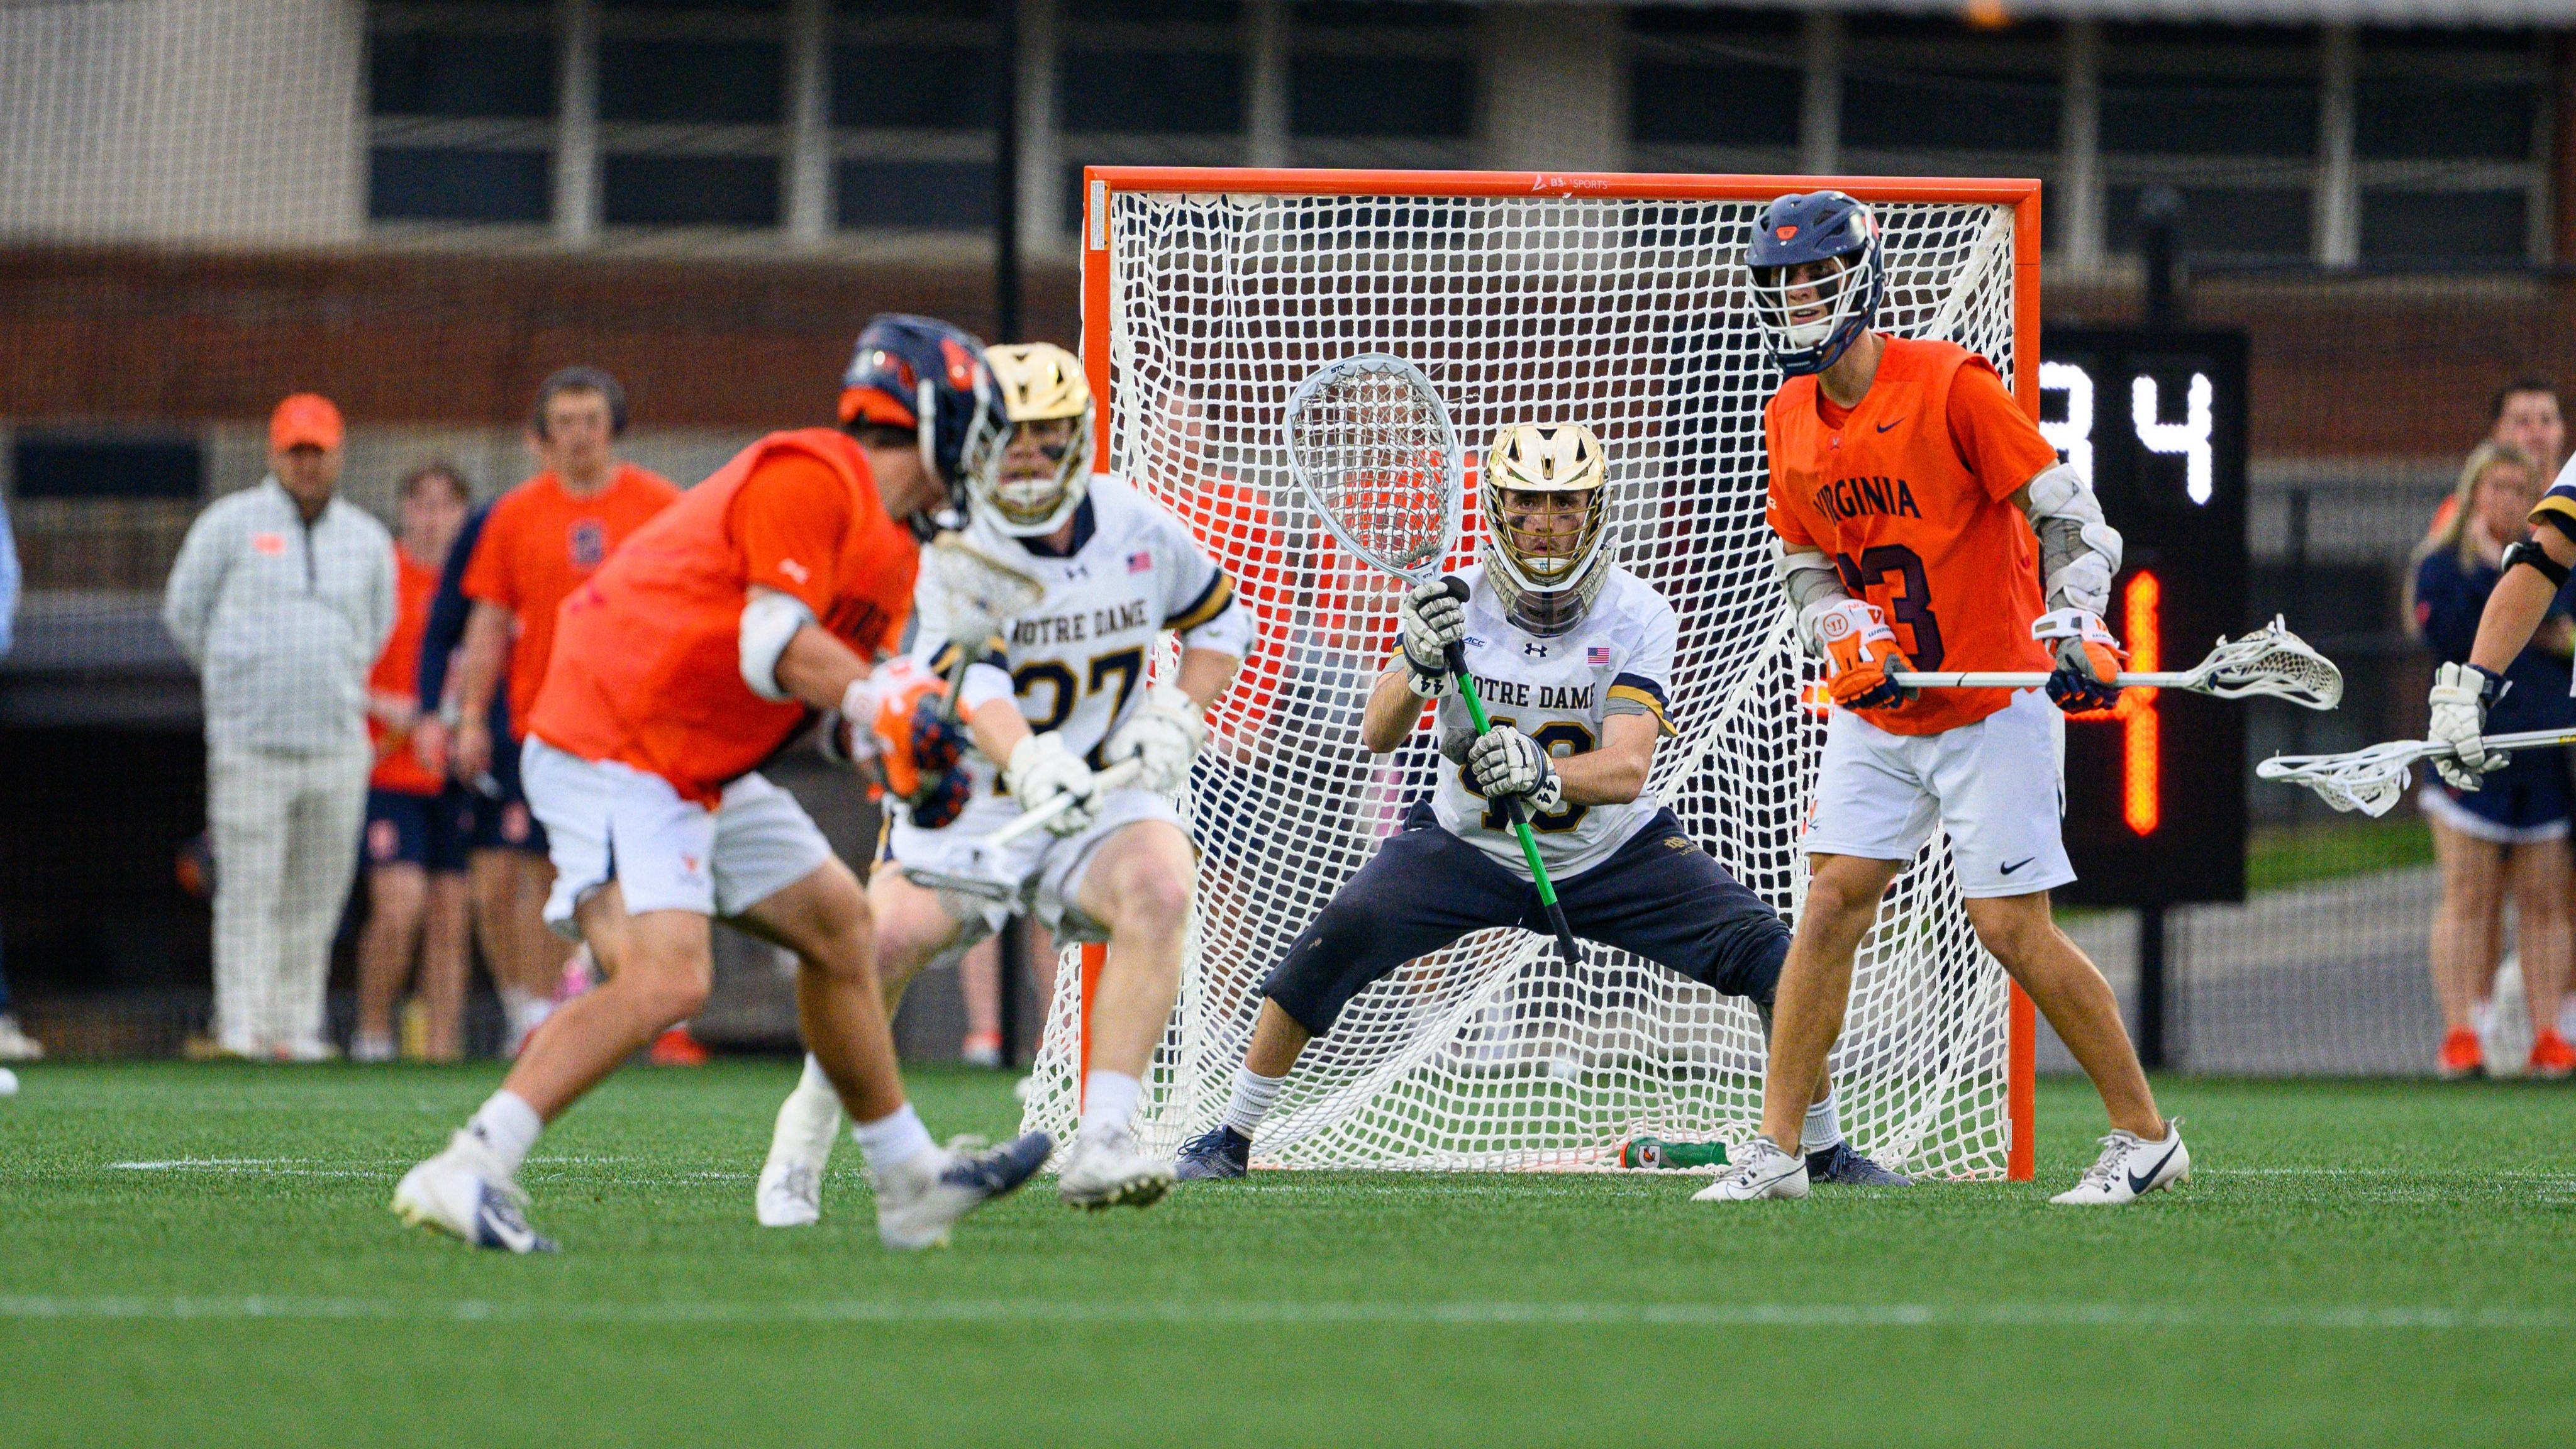 Notre Dame Crushes Virginia 18-9 in ACC Semifinals: Key Highlights